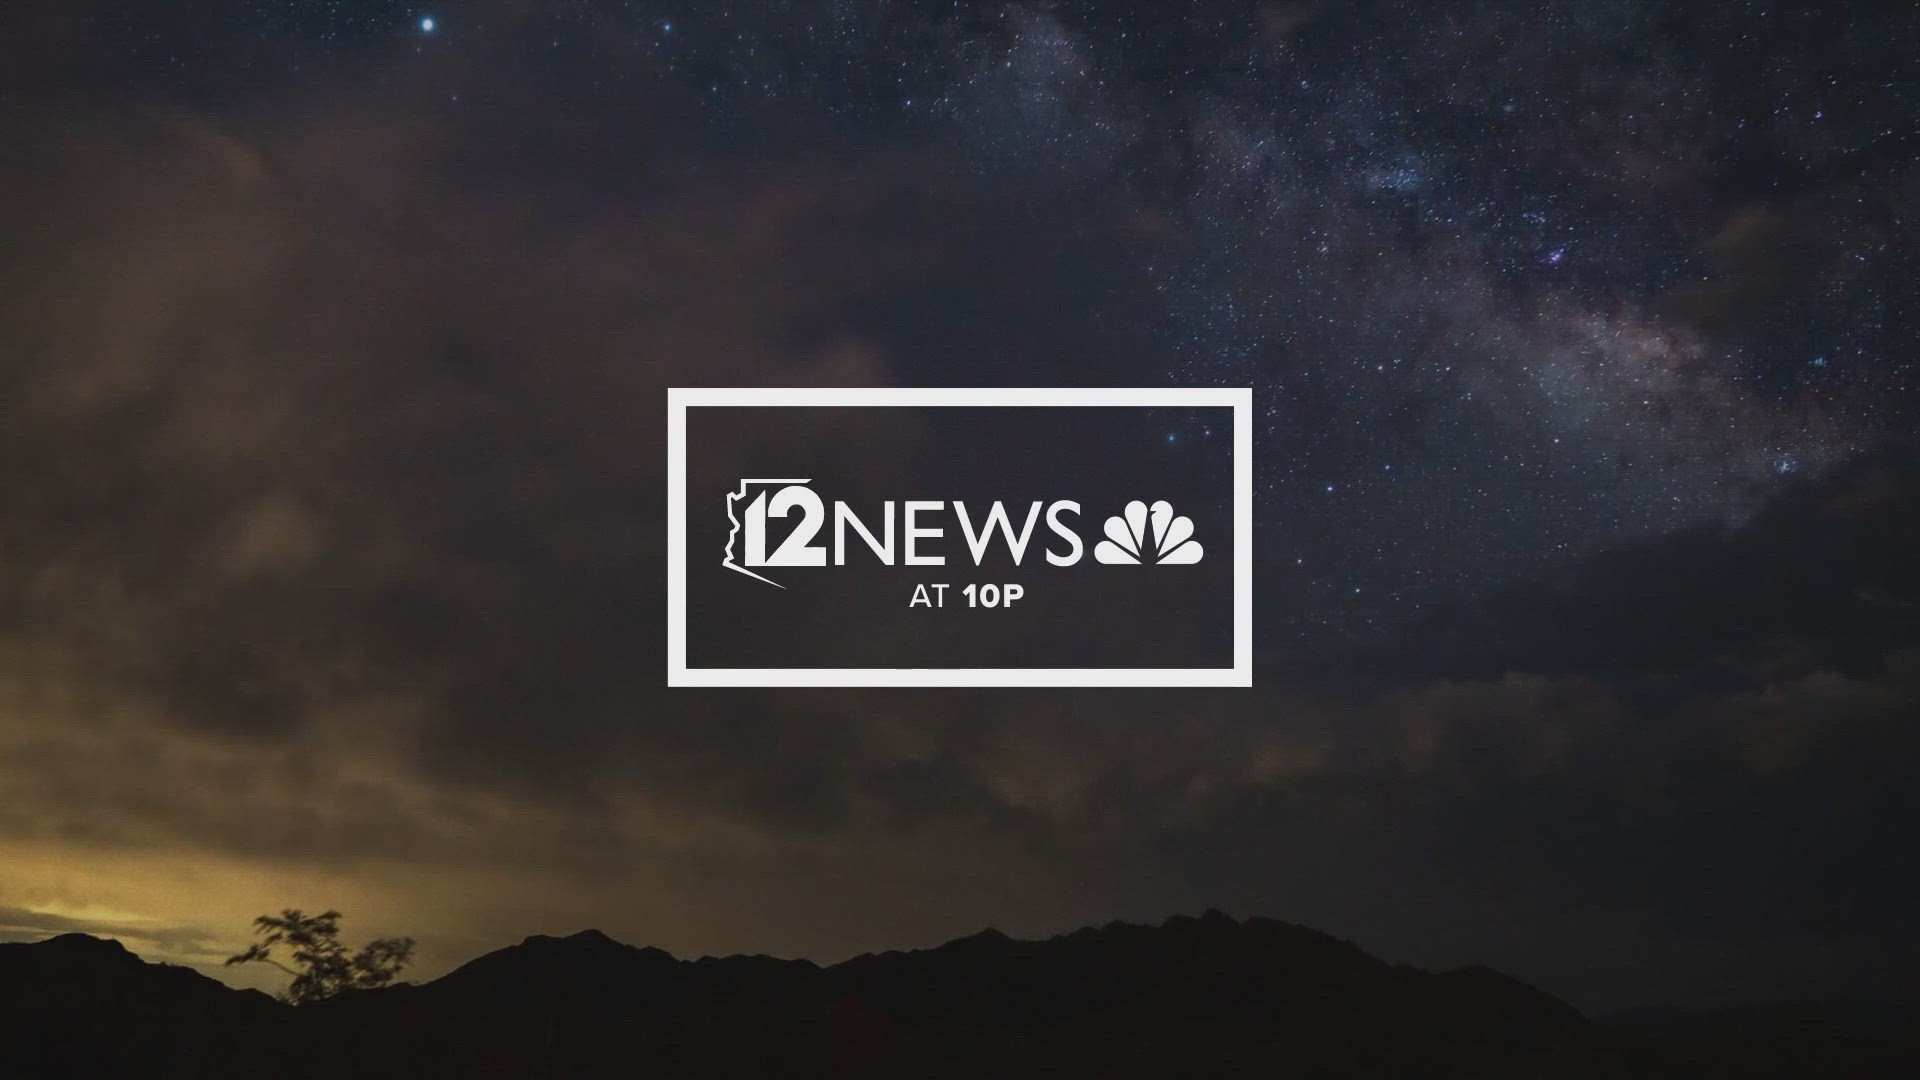 12News has your top stories for Mach 28.